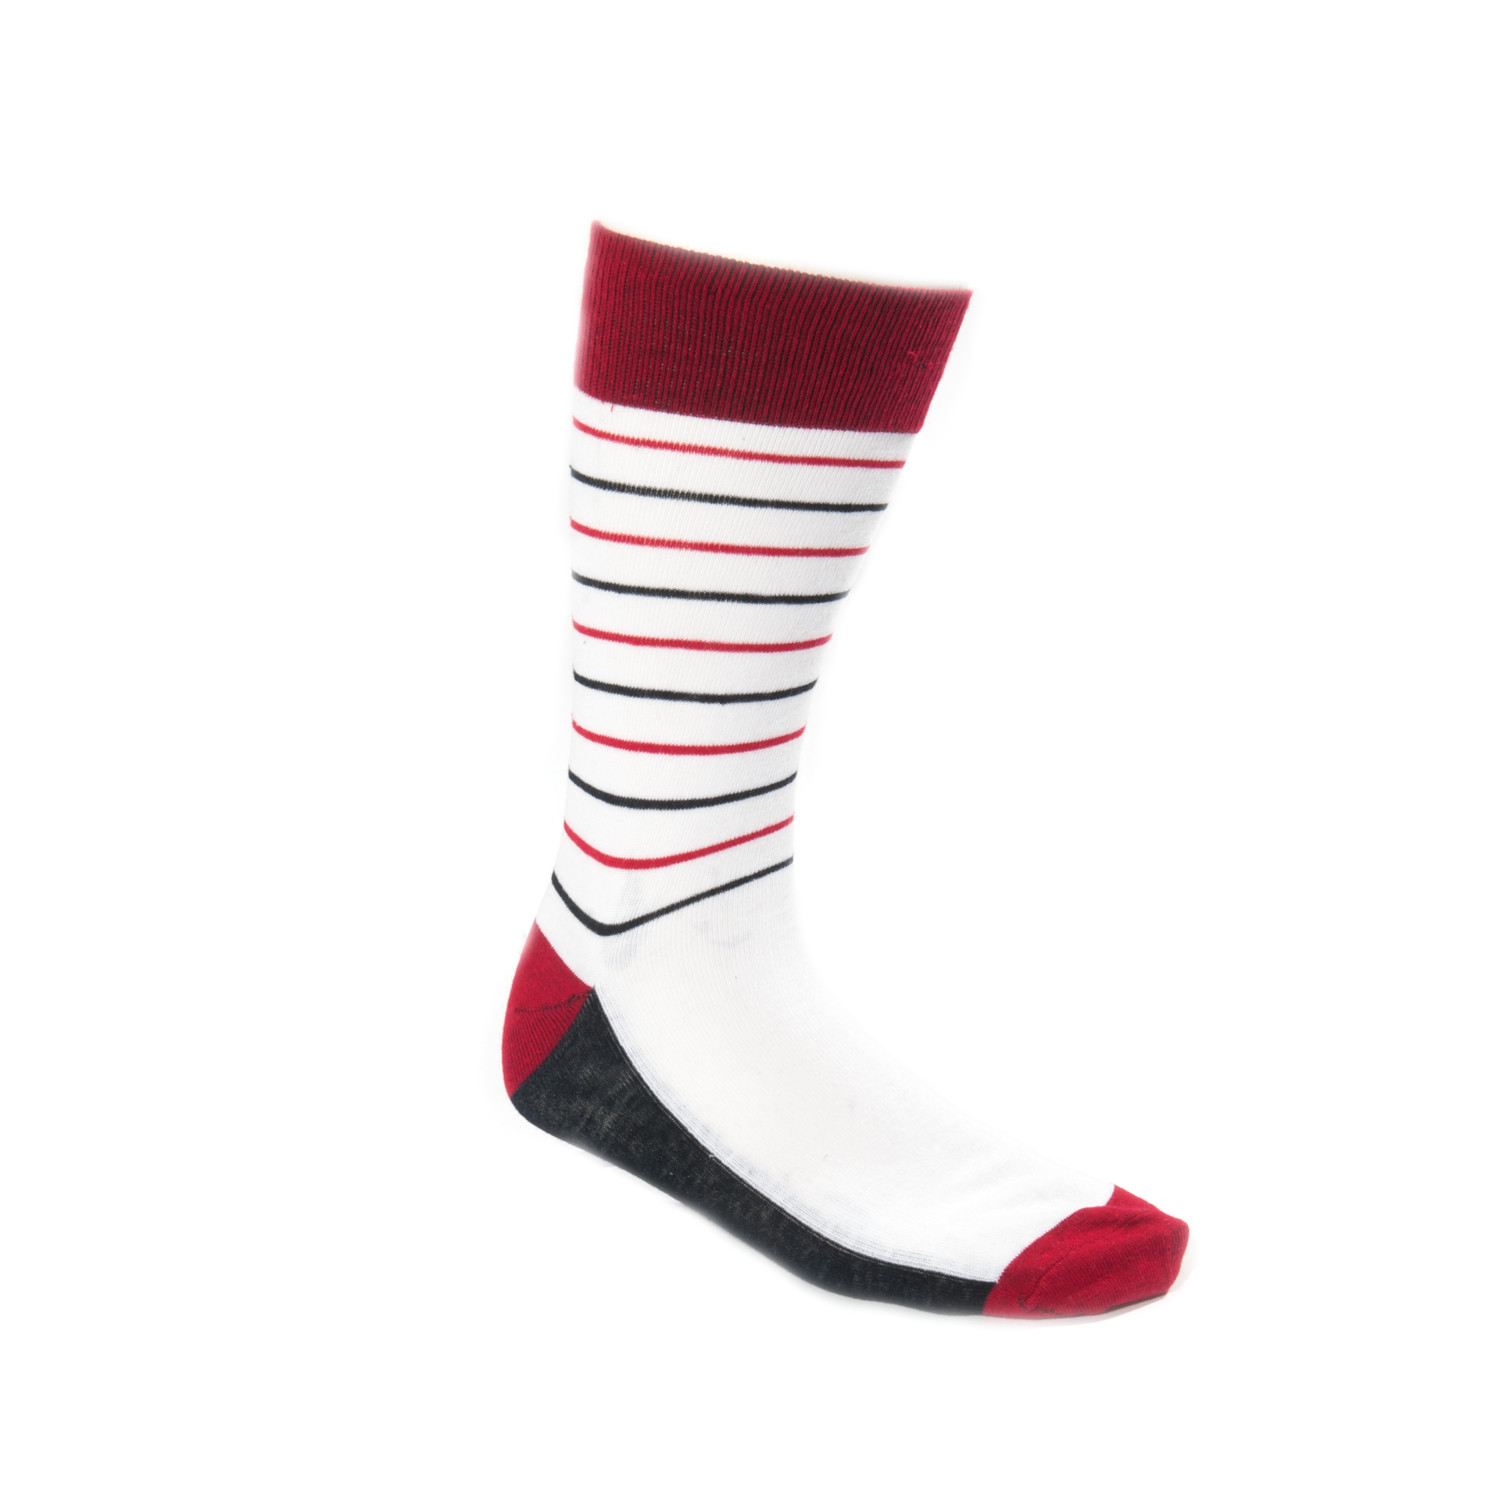 Fancy Men's Socks // Set of 3 // Reds - English Laundry - Touch of Modern